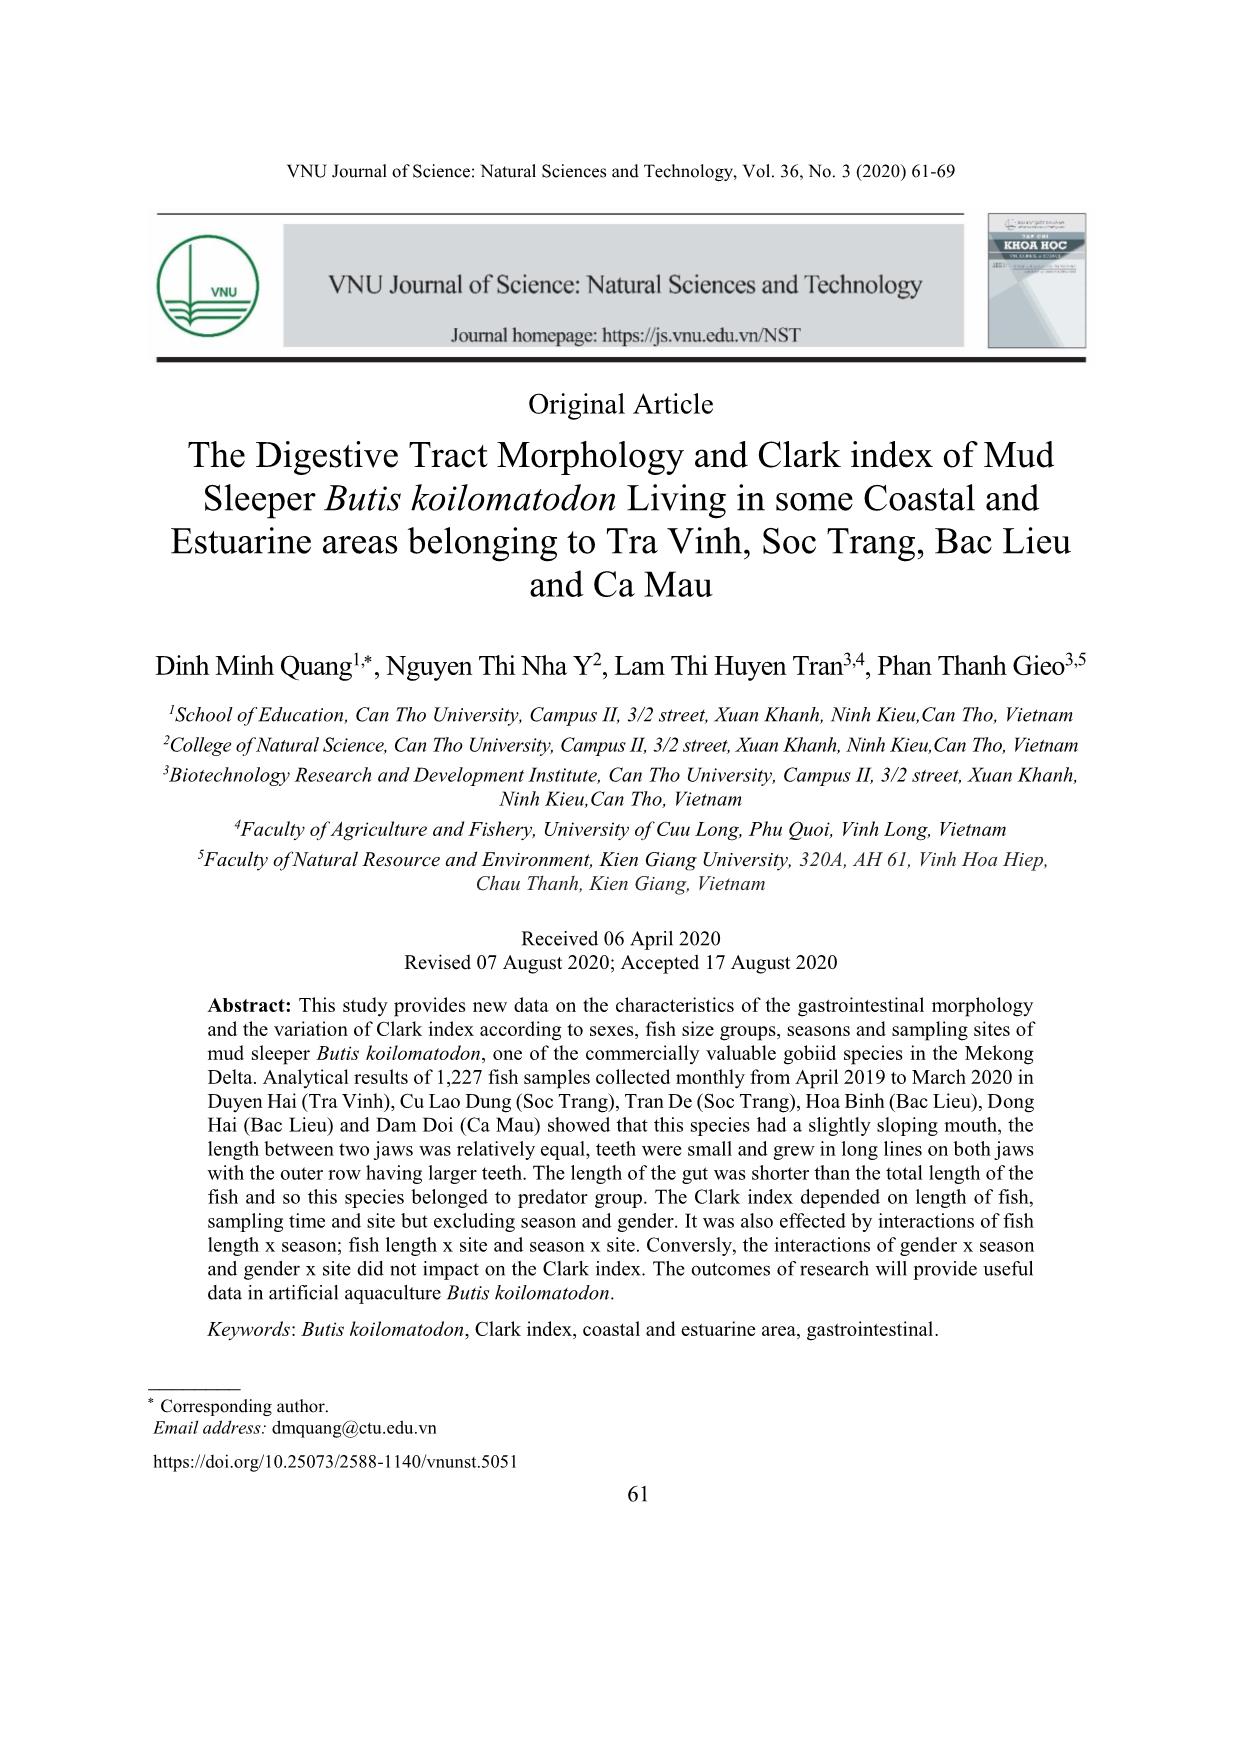 The digestive tract morphology and clark index of mud sleeper butis koilomatodon living in some coastal and estuarine areas belonging to Tra vinh, Soc trang, bac lieu and Ca Mau trang 1